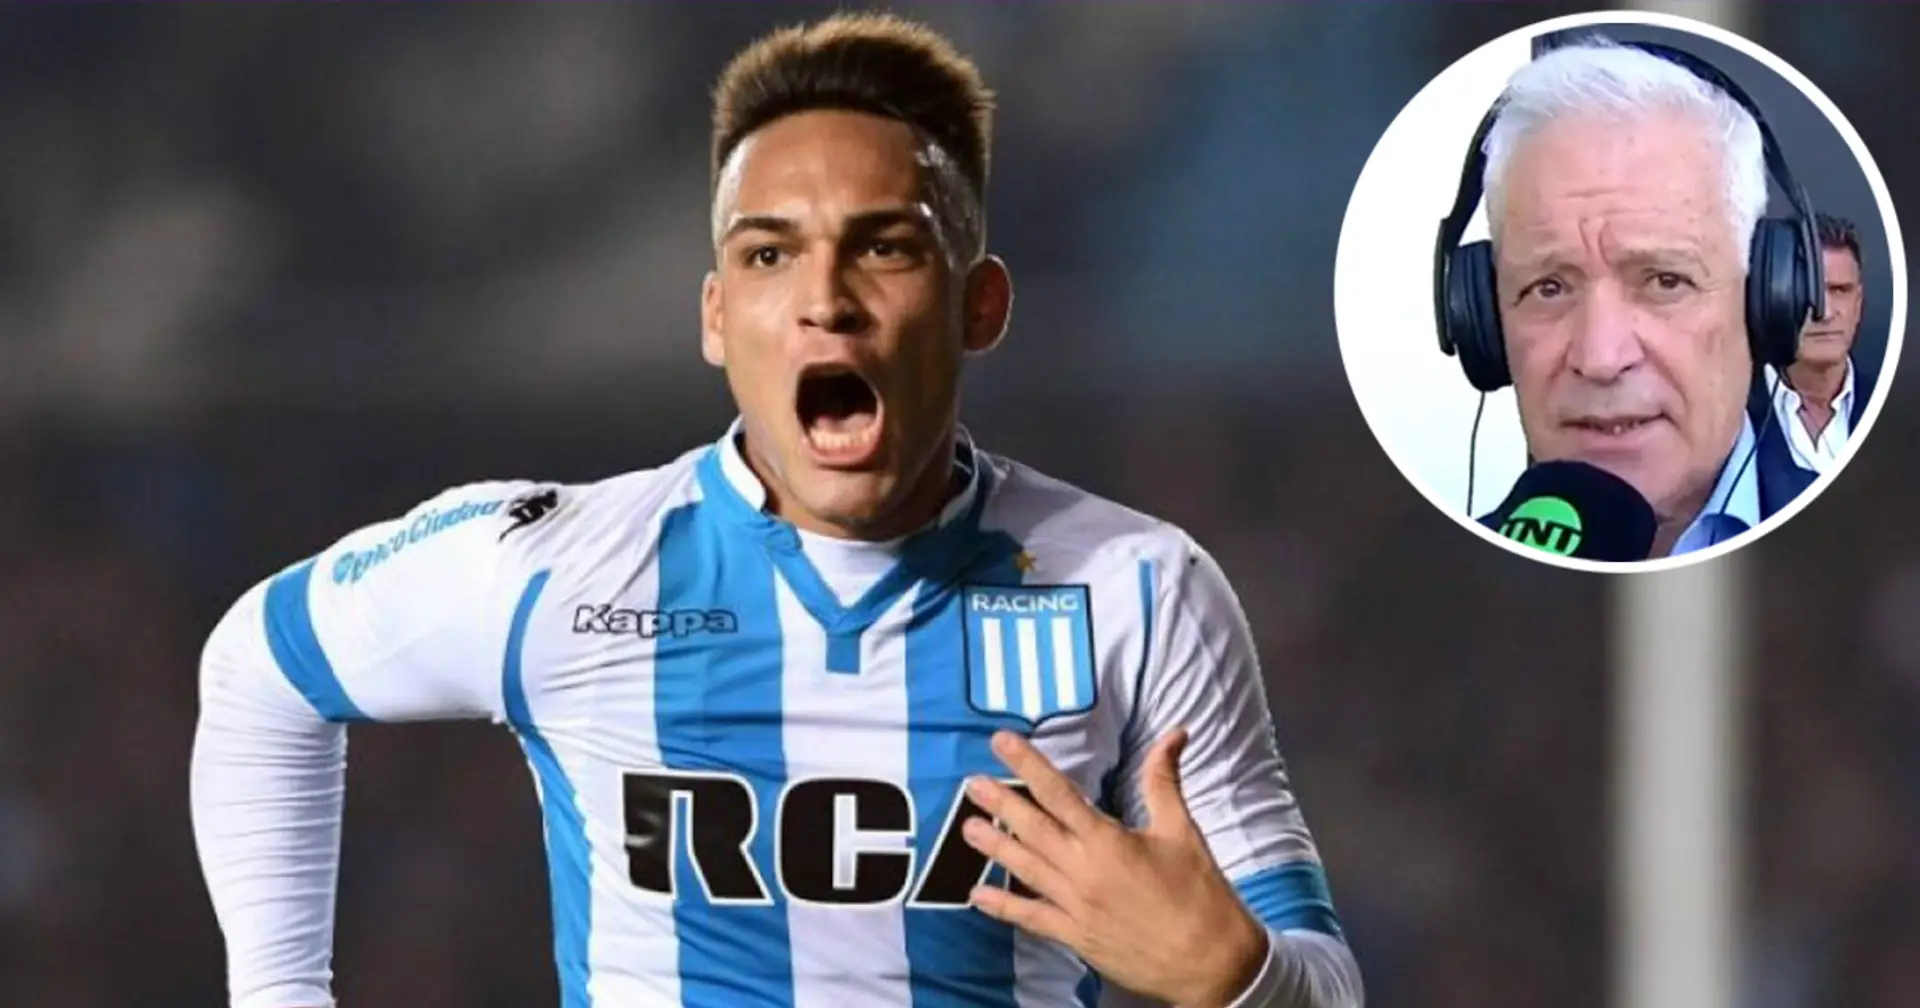 Racing Club president reveals Lautaro Martinez rejected Real Madrid's offer in 2015